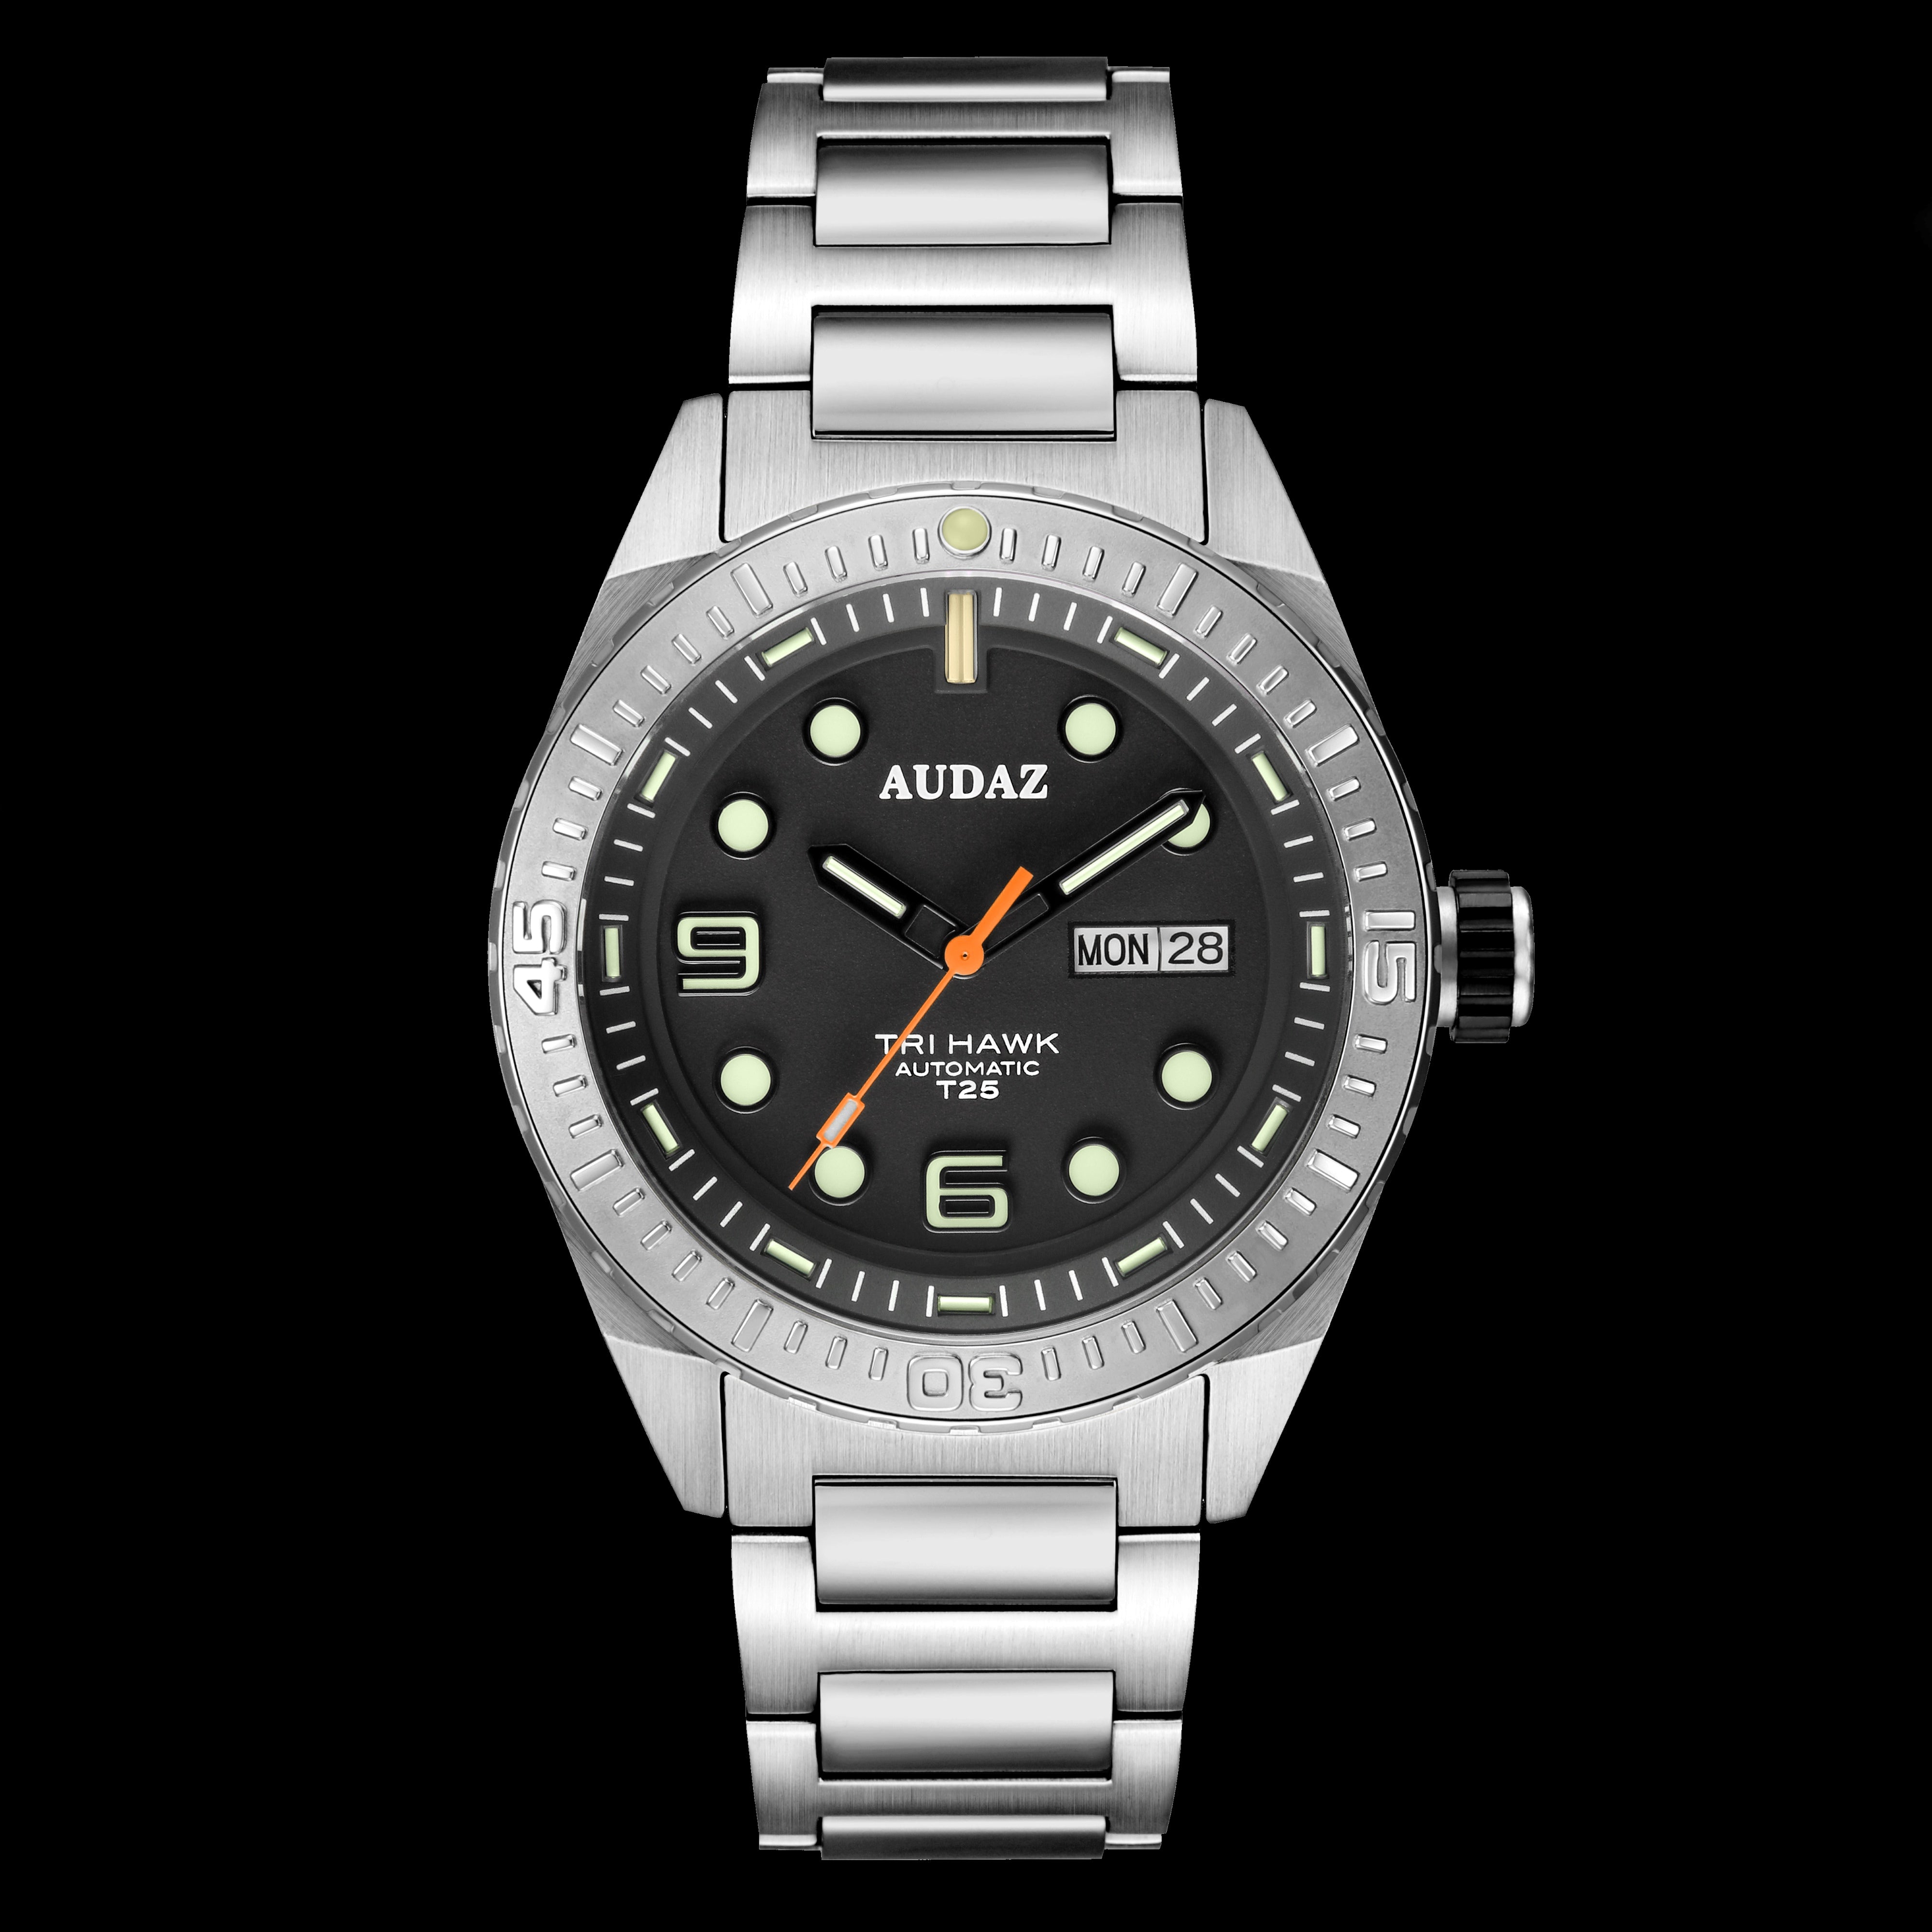 Tri-Hawk Dive Watches - Tritium Lume Watches Tubes Audaz with I Dials I Automatic